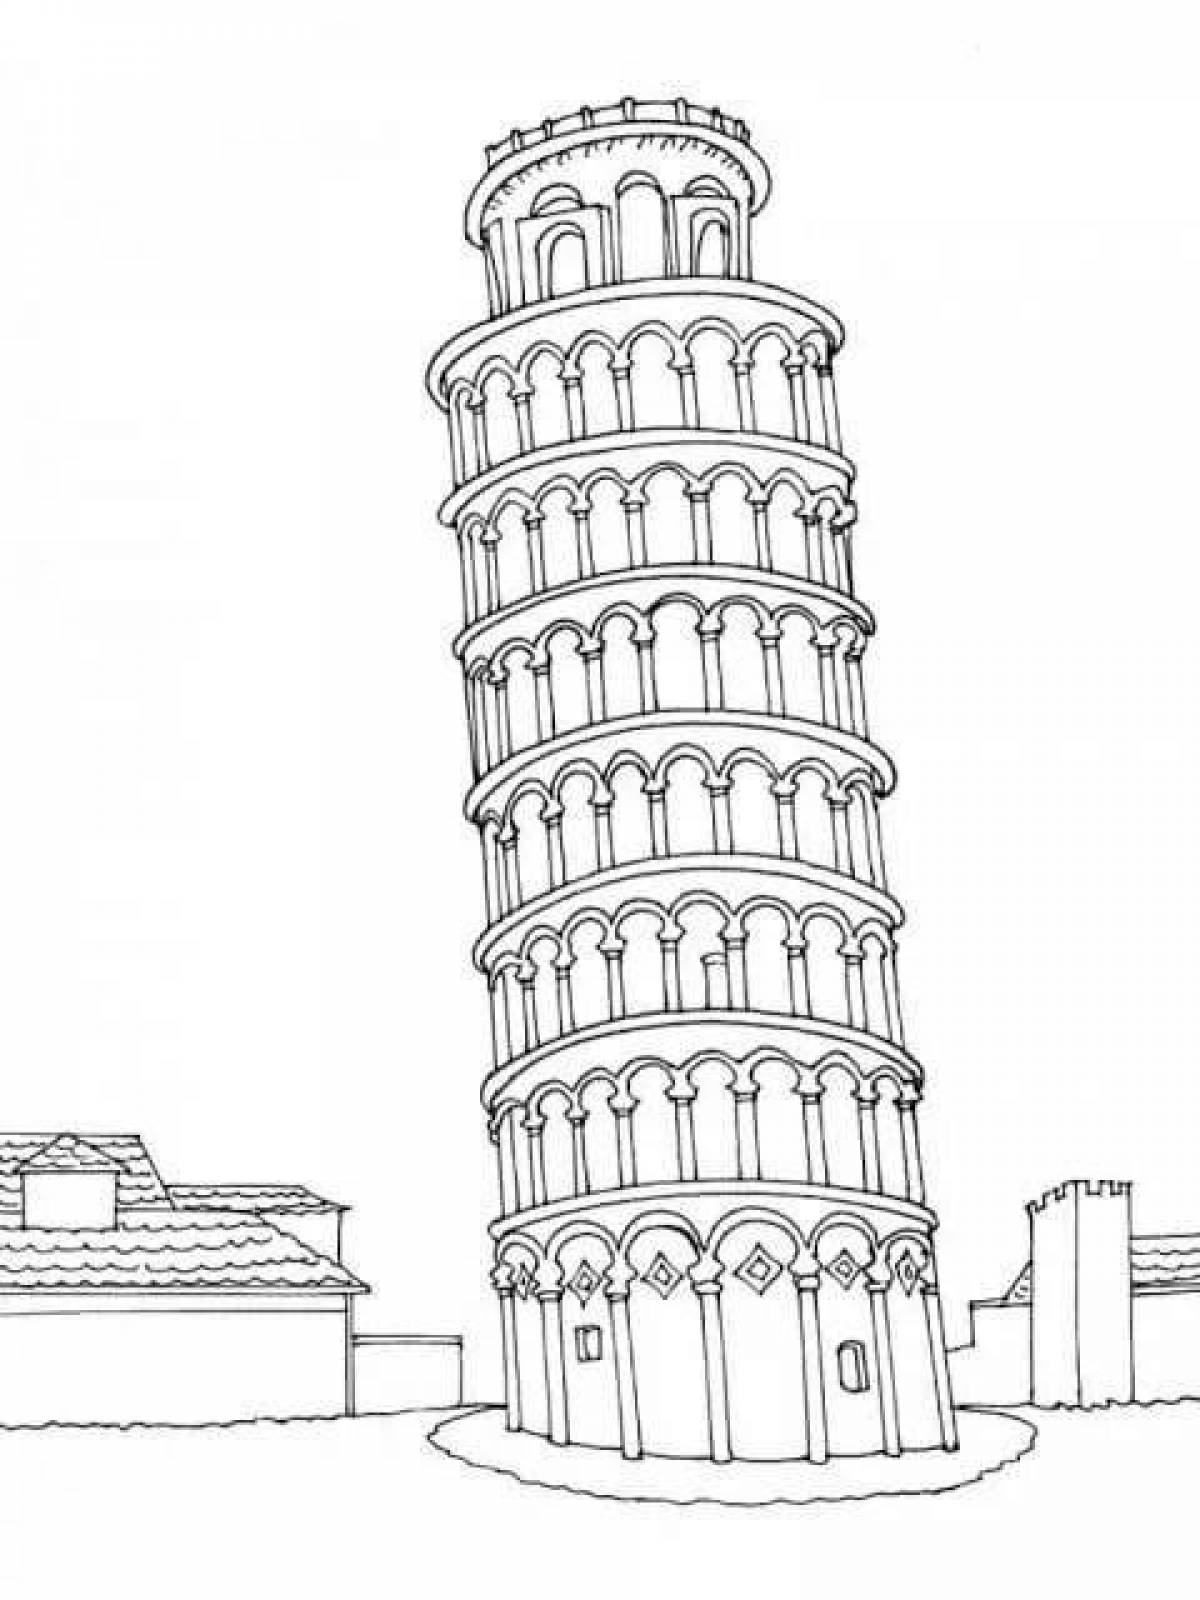 Leaning Tower of Pisa #2